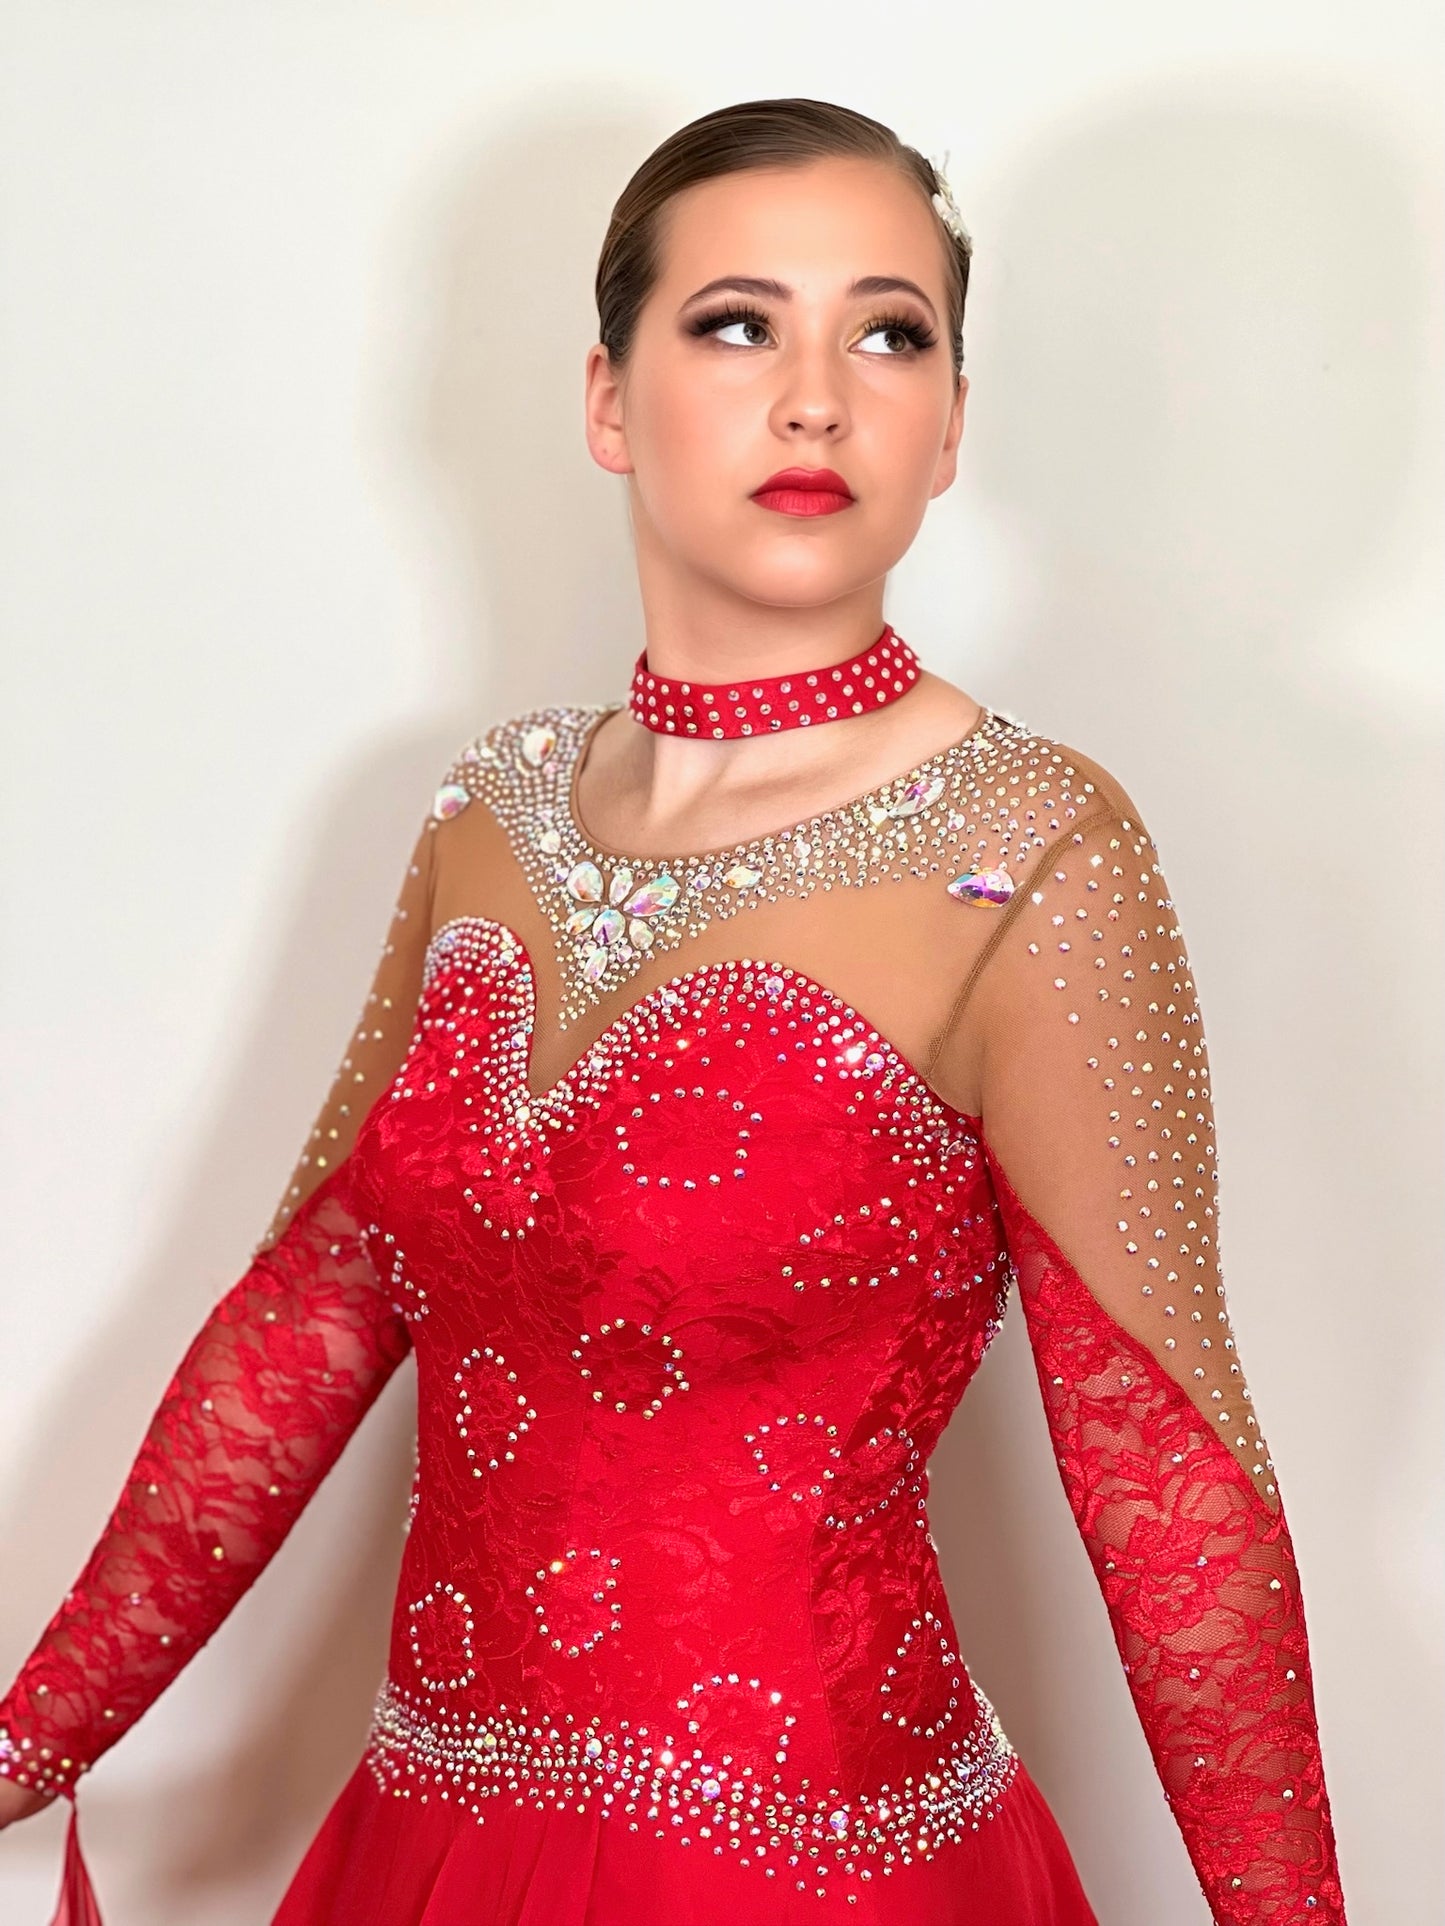 245 Red Ballroom Dress. Decorated in AB stones with bodice chest detail.